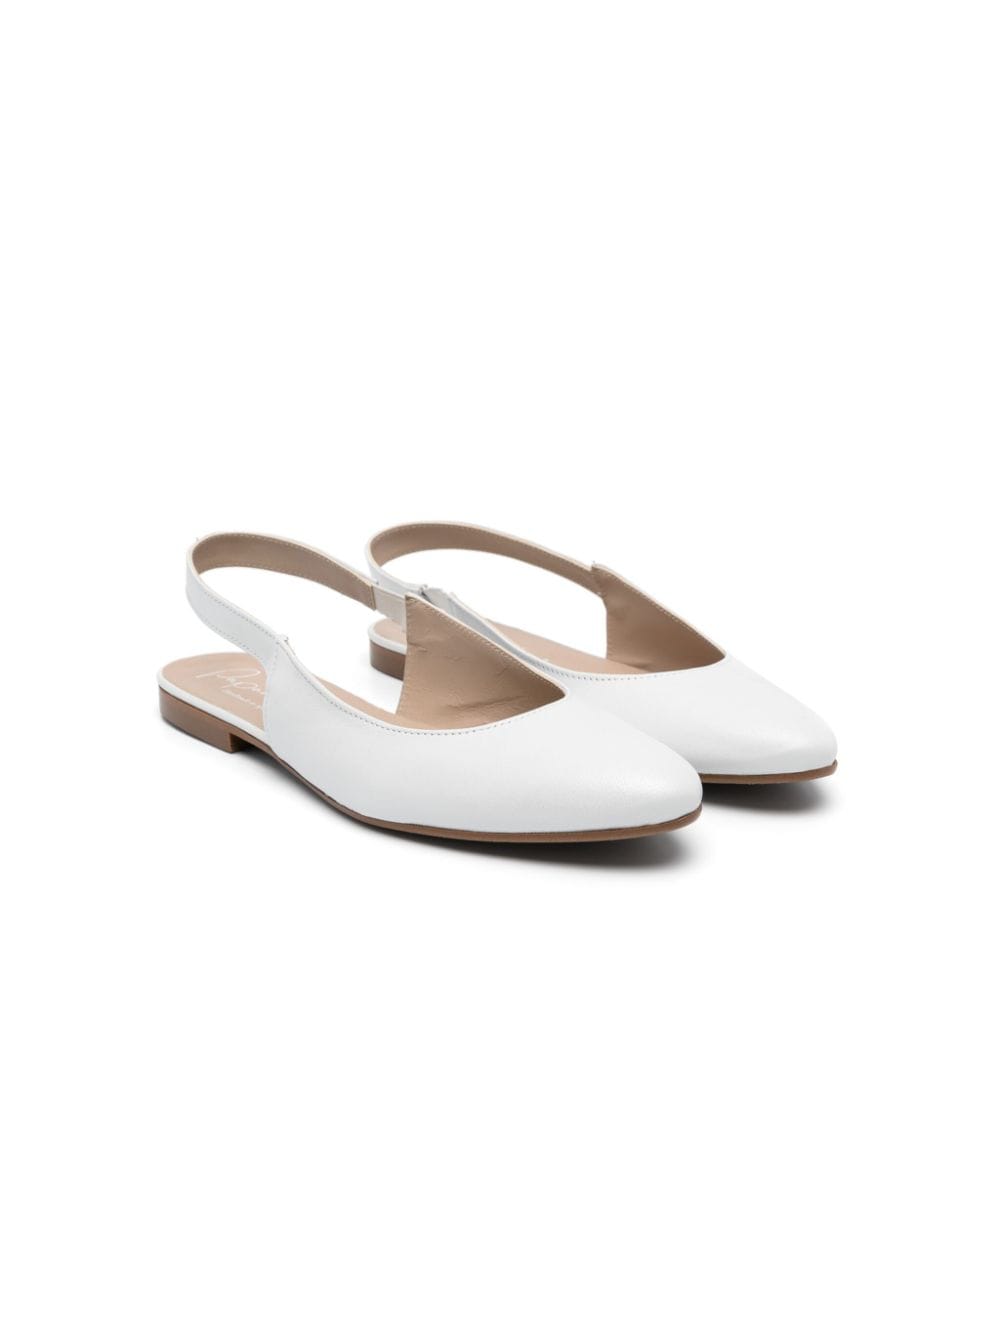 Eli1957 Kids' Leather Ballerina Shoes In White